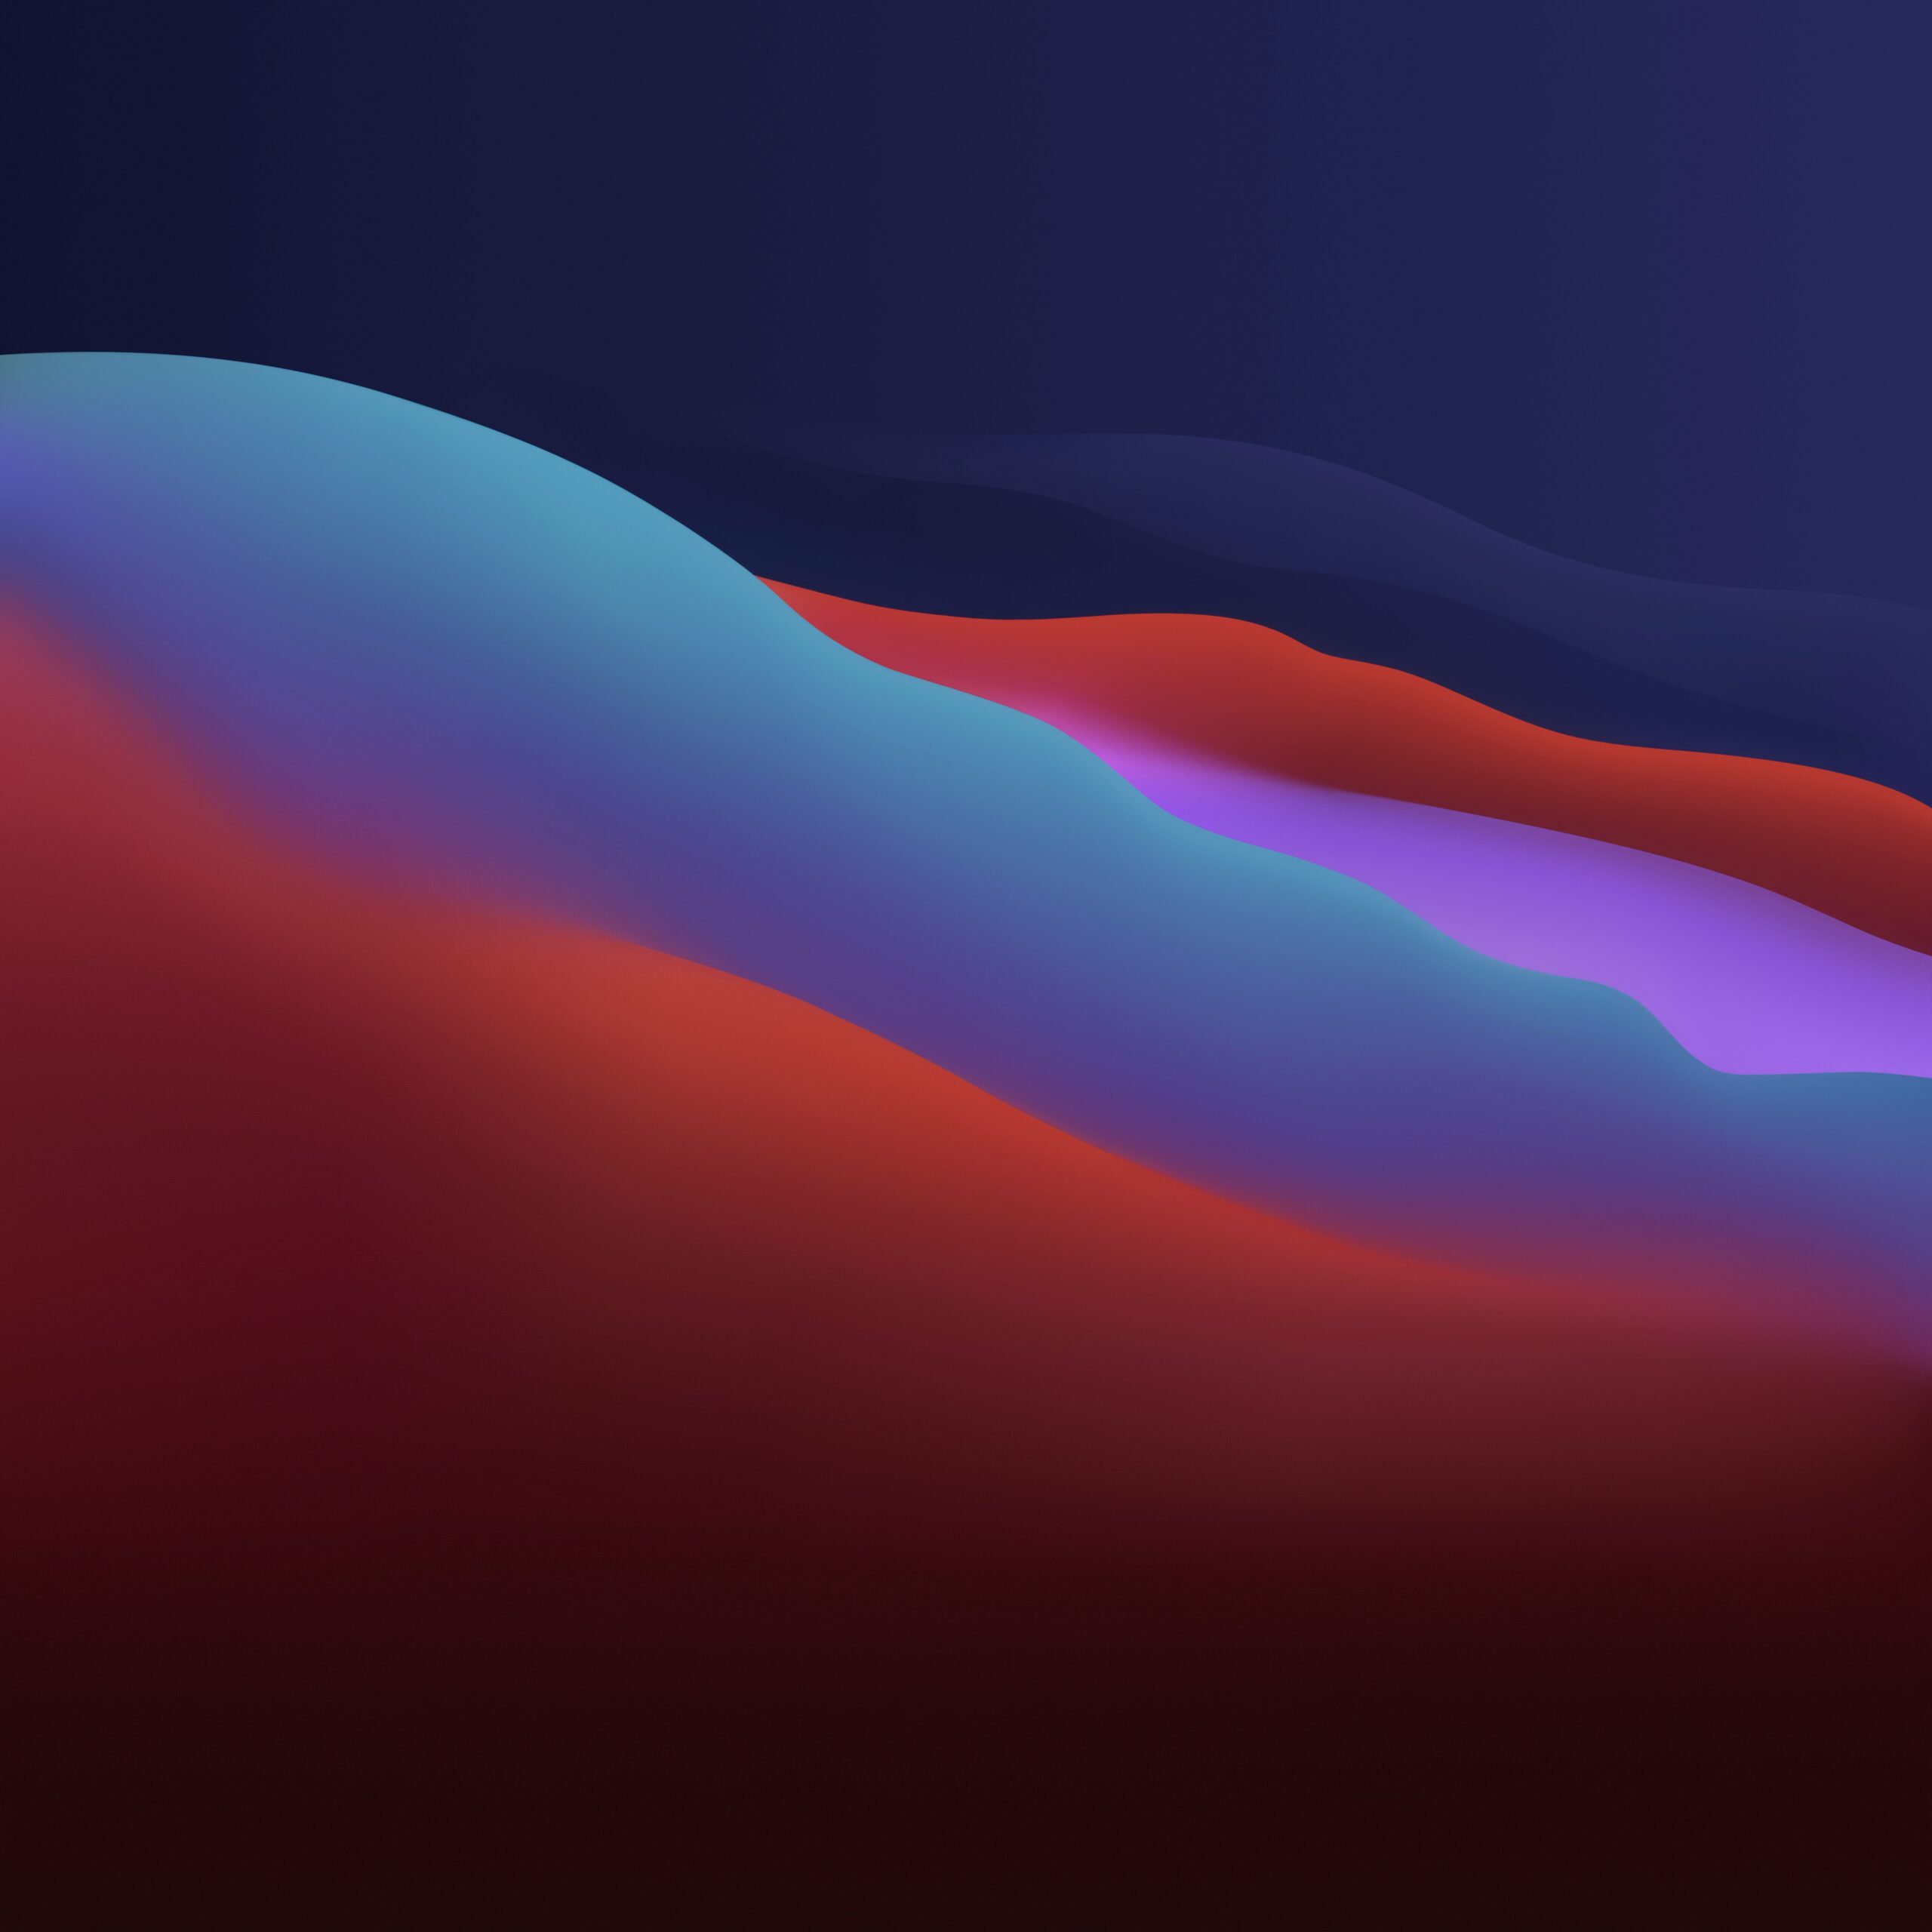 Get the macOS Big Sur Default Wallpapers | OSXDaily